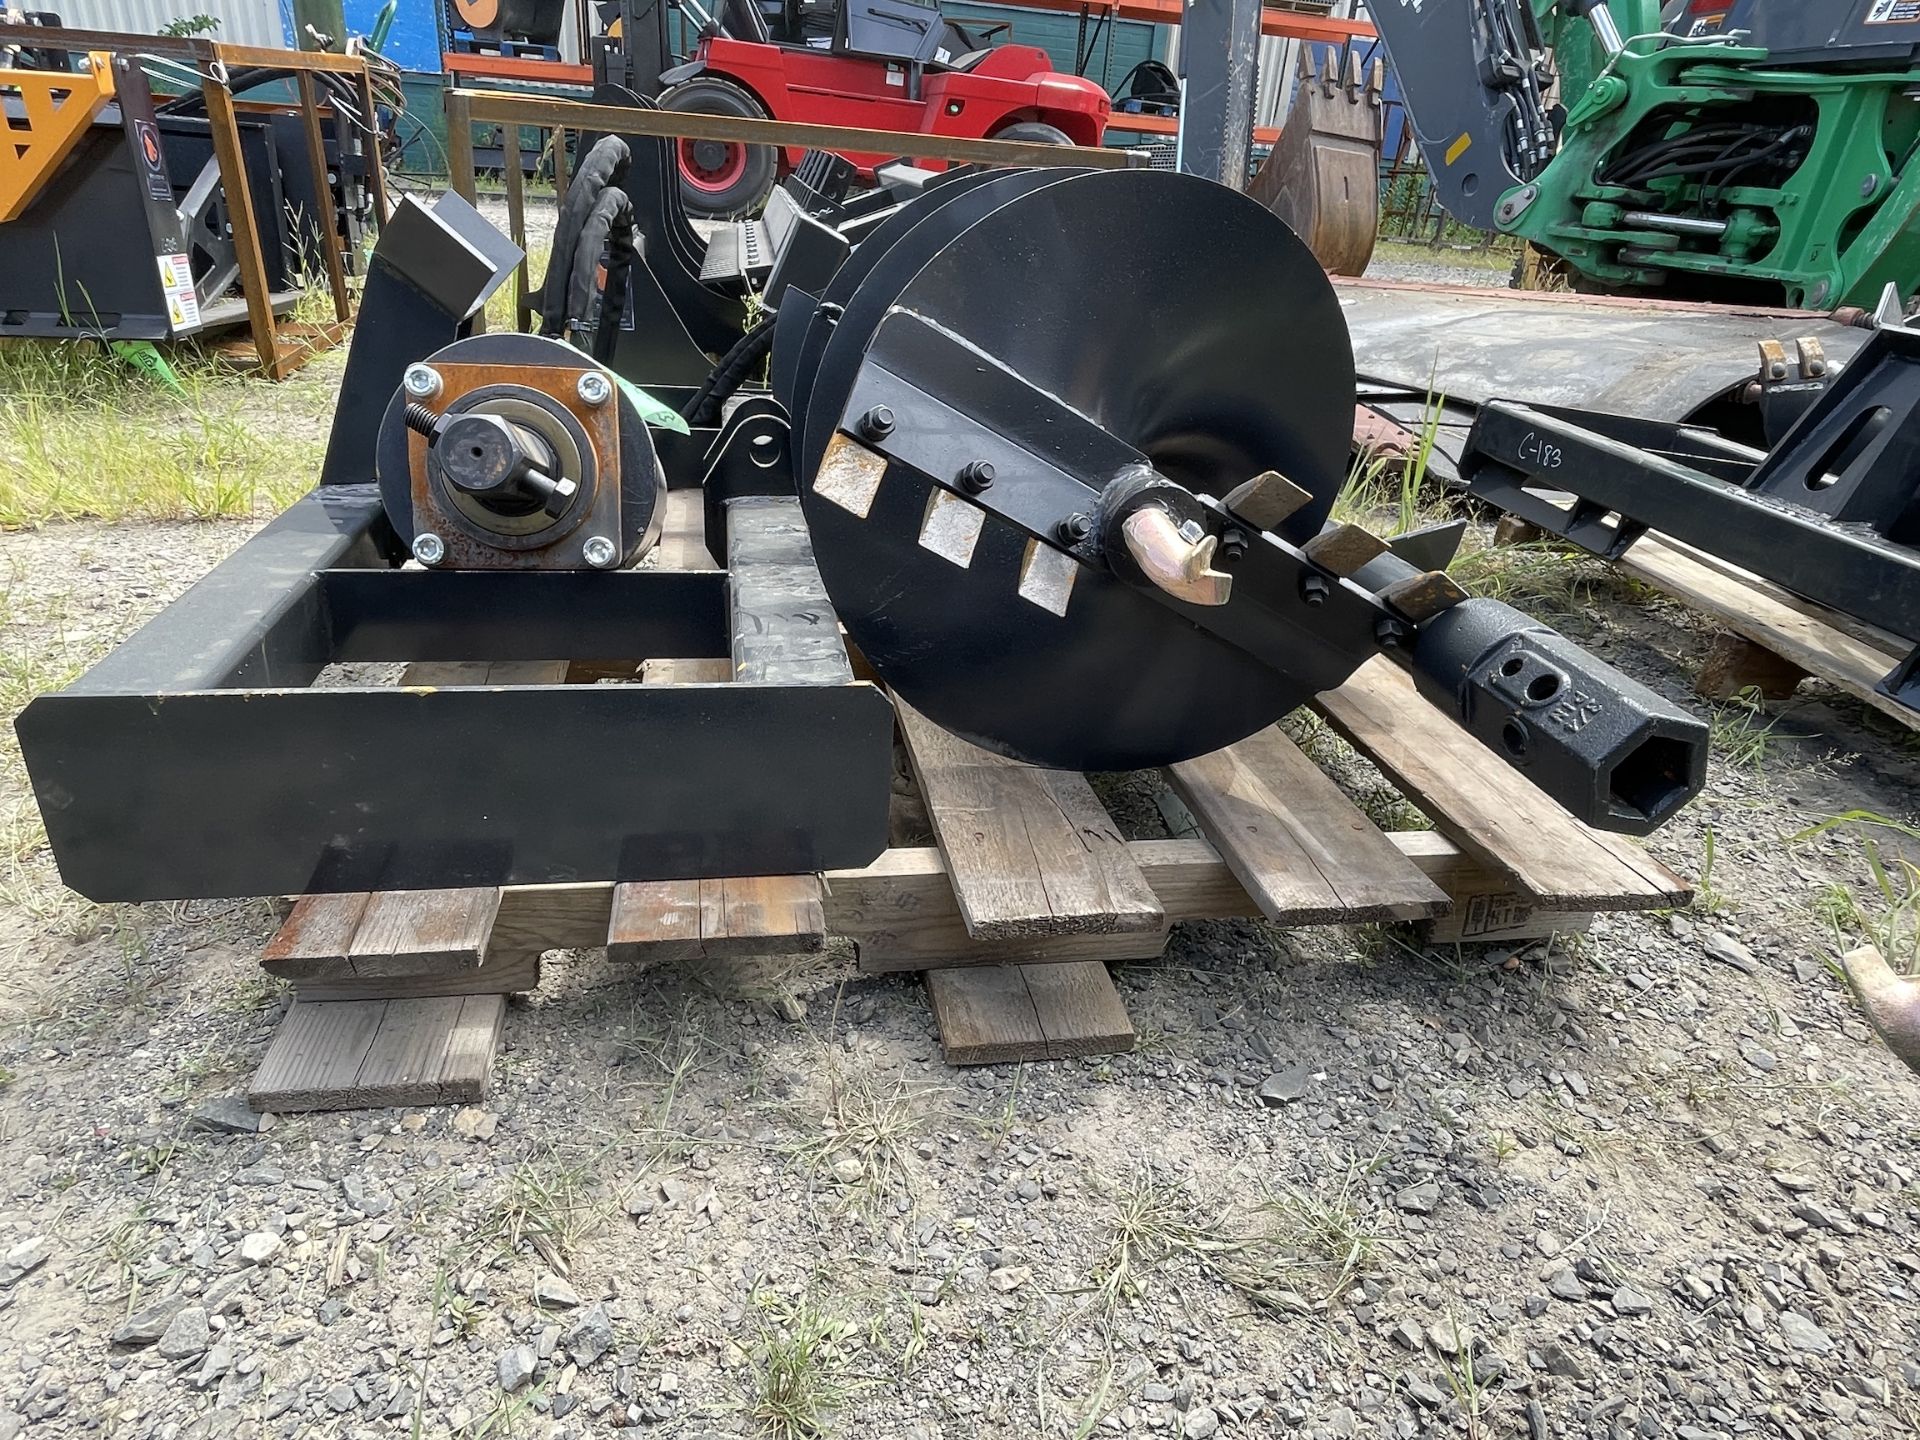 New Wolverine Skid Steer Auger Attachment (C186) - Image 4 of 7